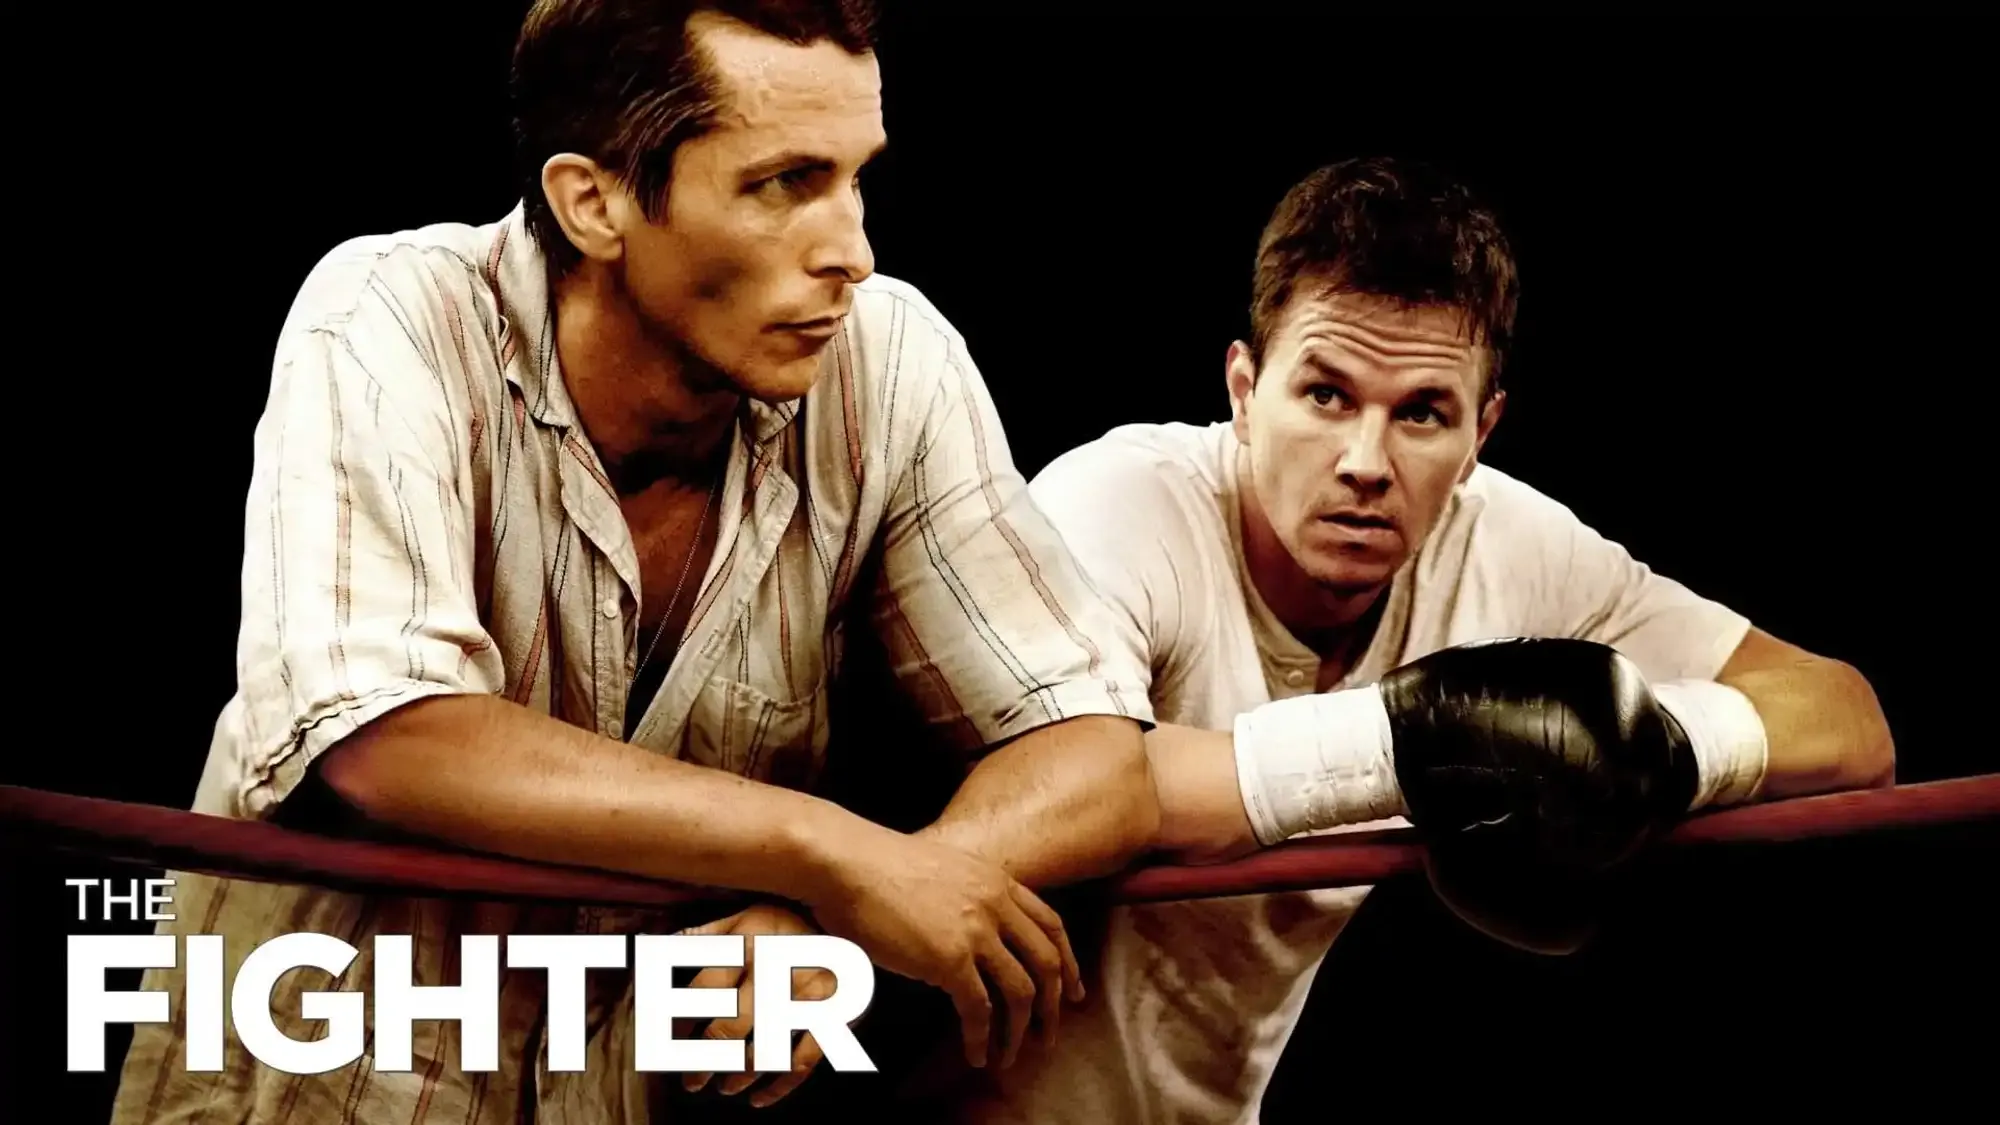 The Fighter movie review